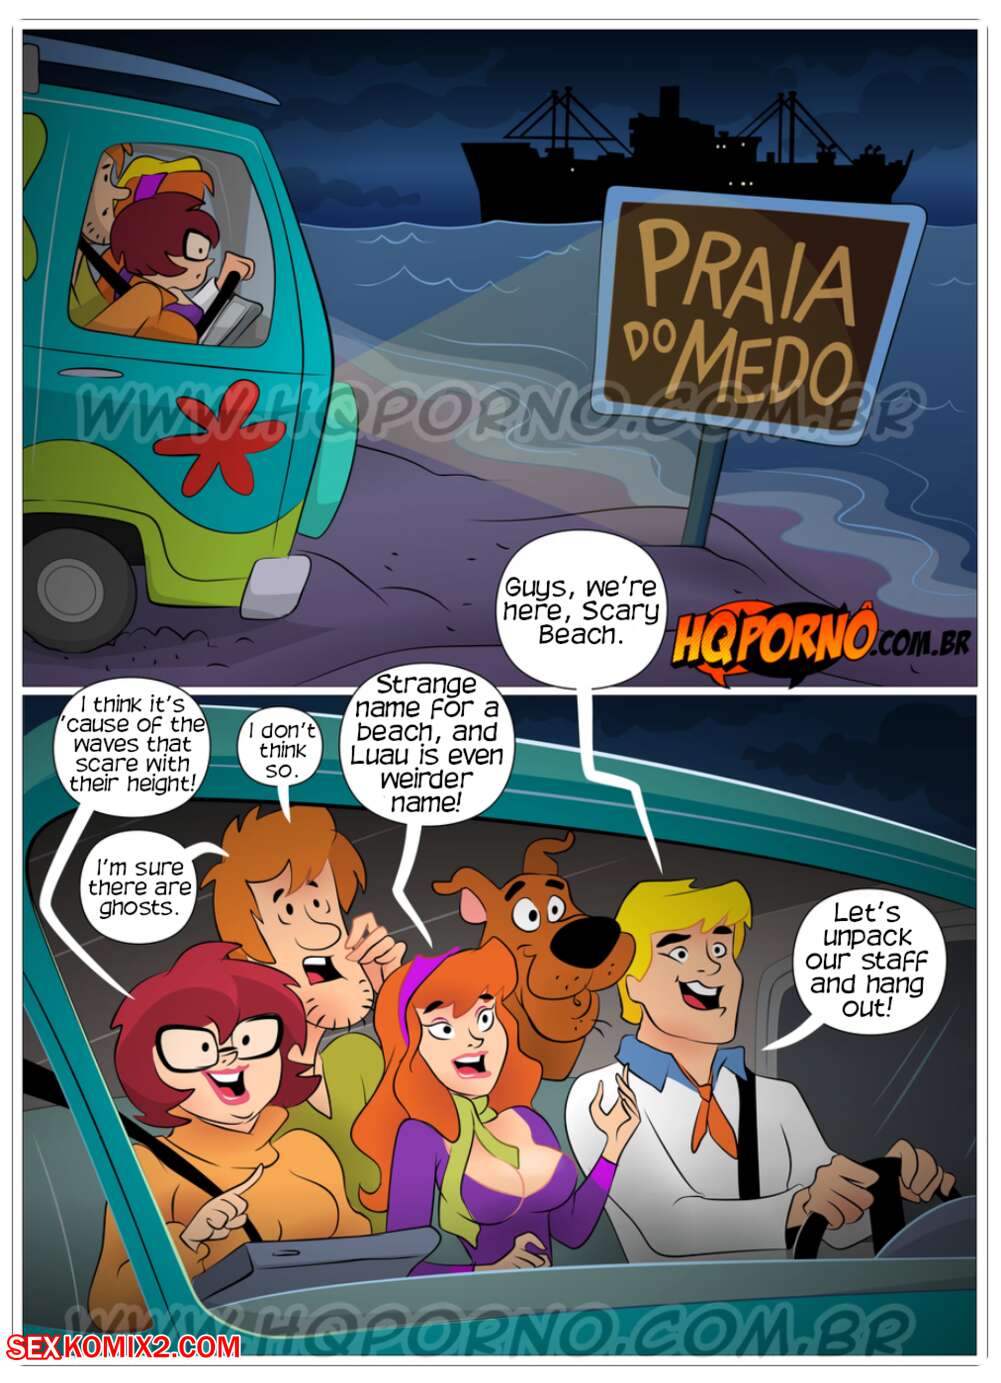 😈 Porn comic Scooby Doo. Part 5. Naughty or innocent. Scooby Cool. Hqporno  Erotic comic they met a 😈 | Porn comics hentai adult only |  hqporncomics.com